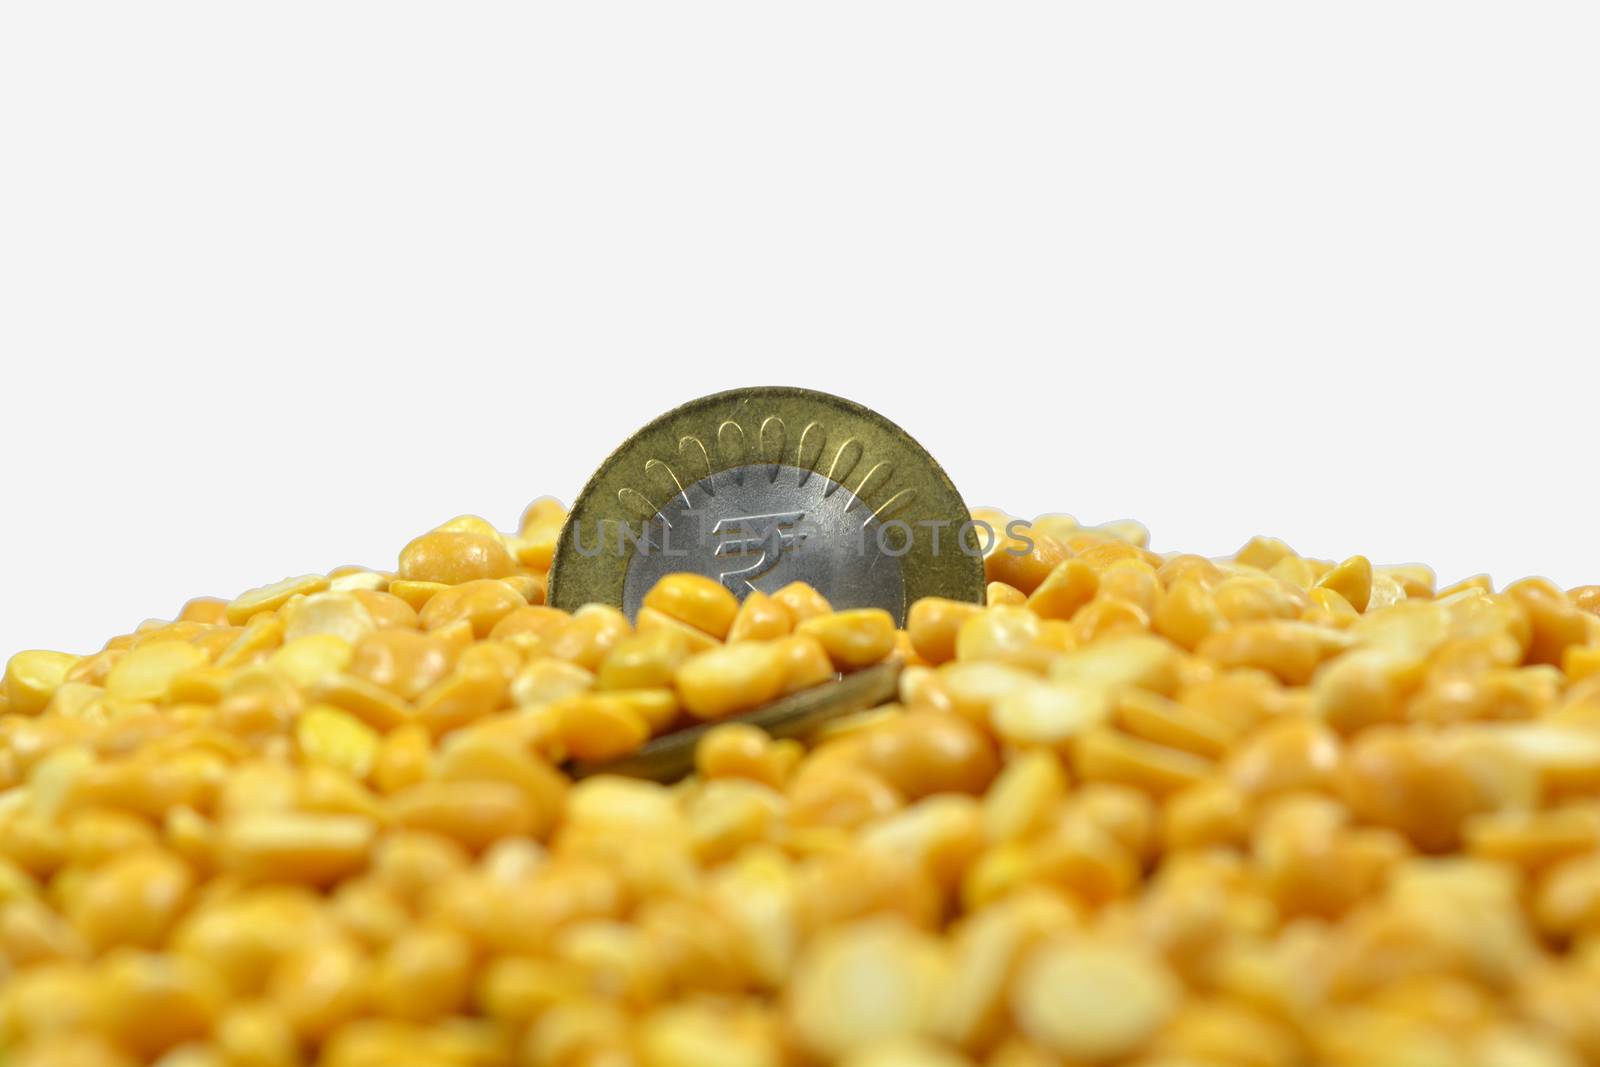 Full of Arhar or masoor Dhal or Toor Dal Pigeon Pea in dal on isolted white background with 5 Rupee Coins indian currency by lakshmiprasad.maski@gmai.com